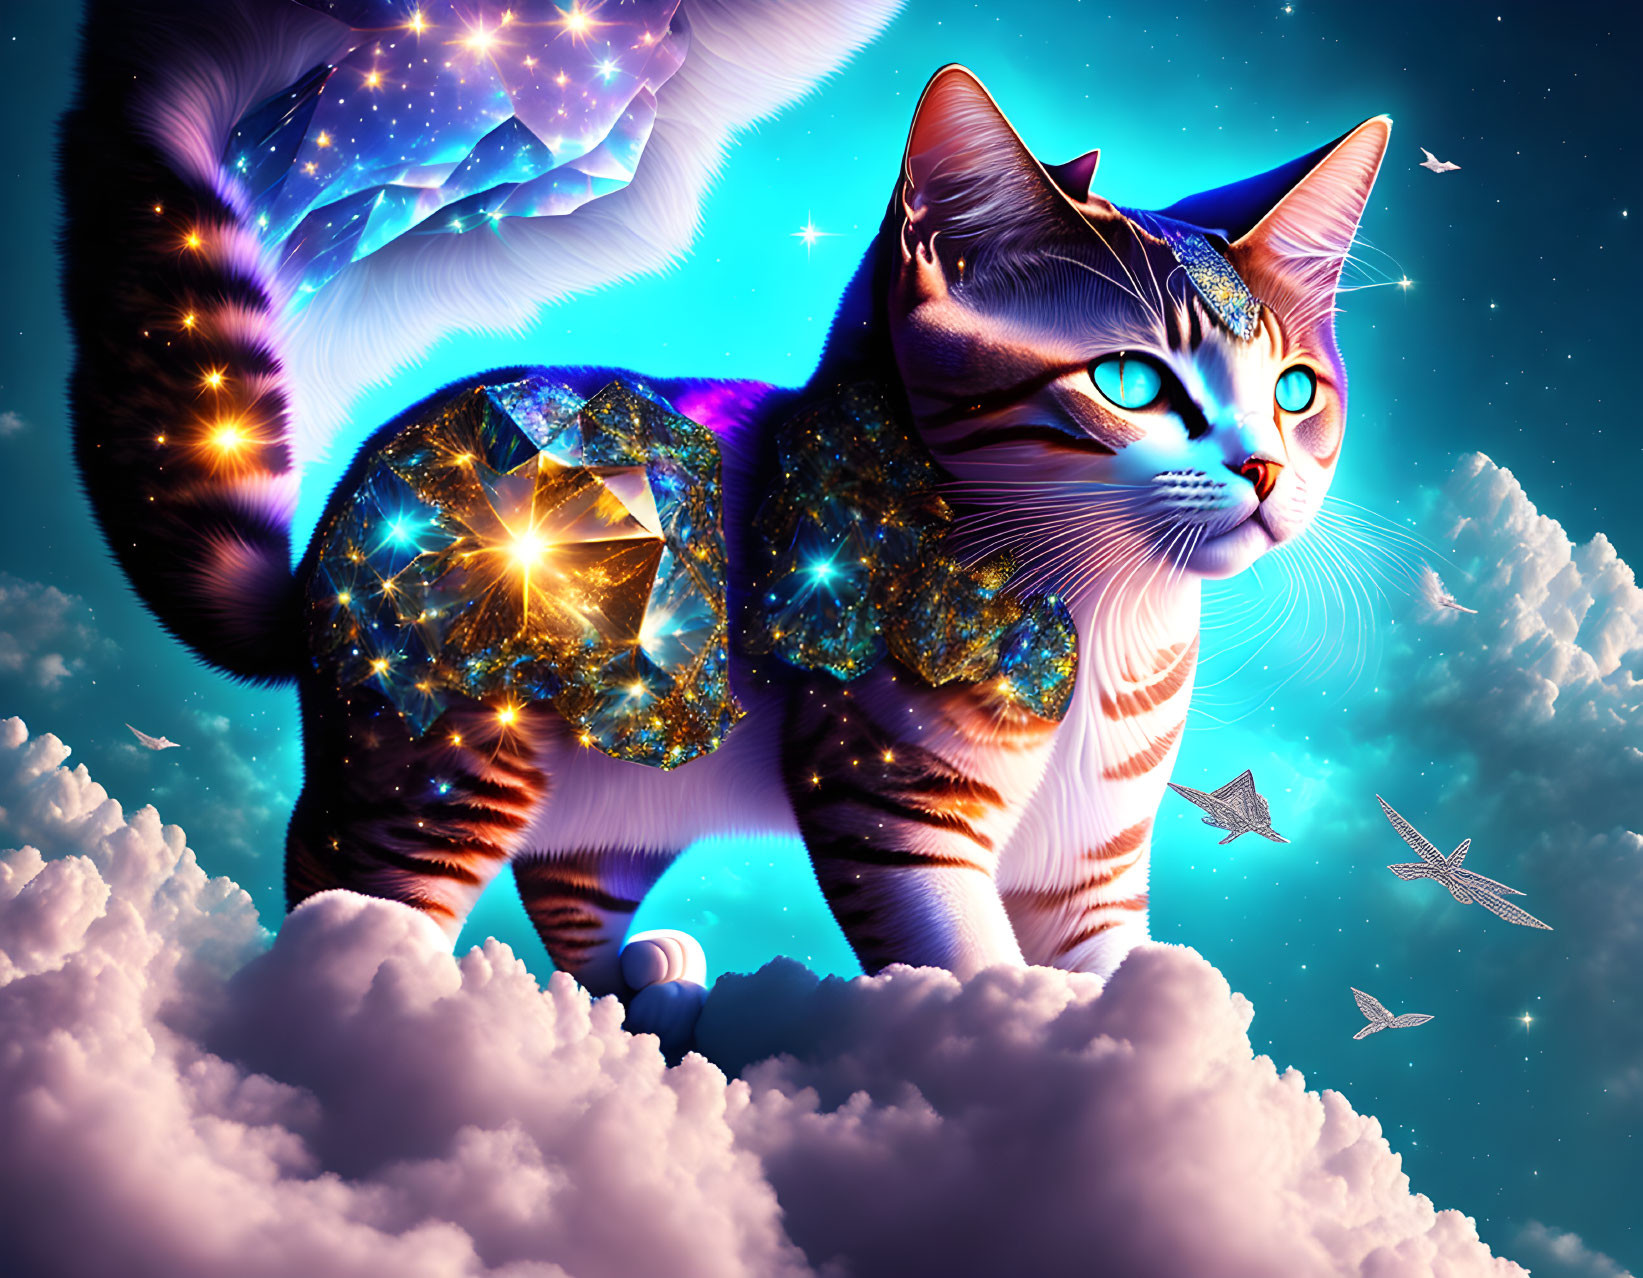 Surreal cat with cosmic body on clouds in starry sky